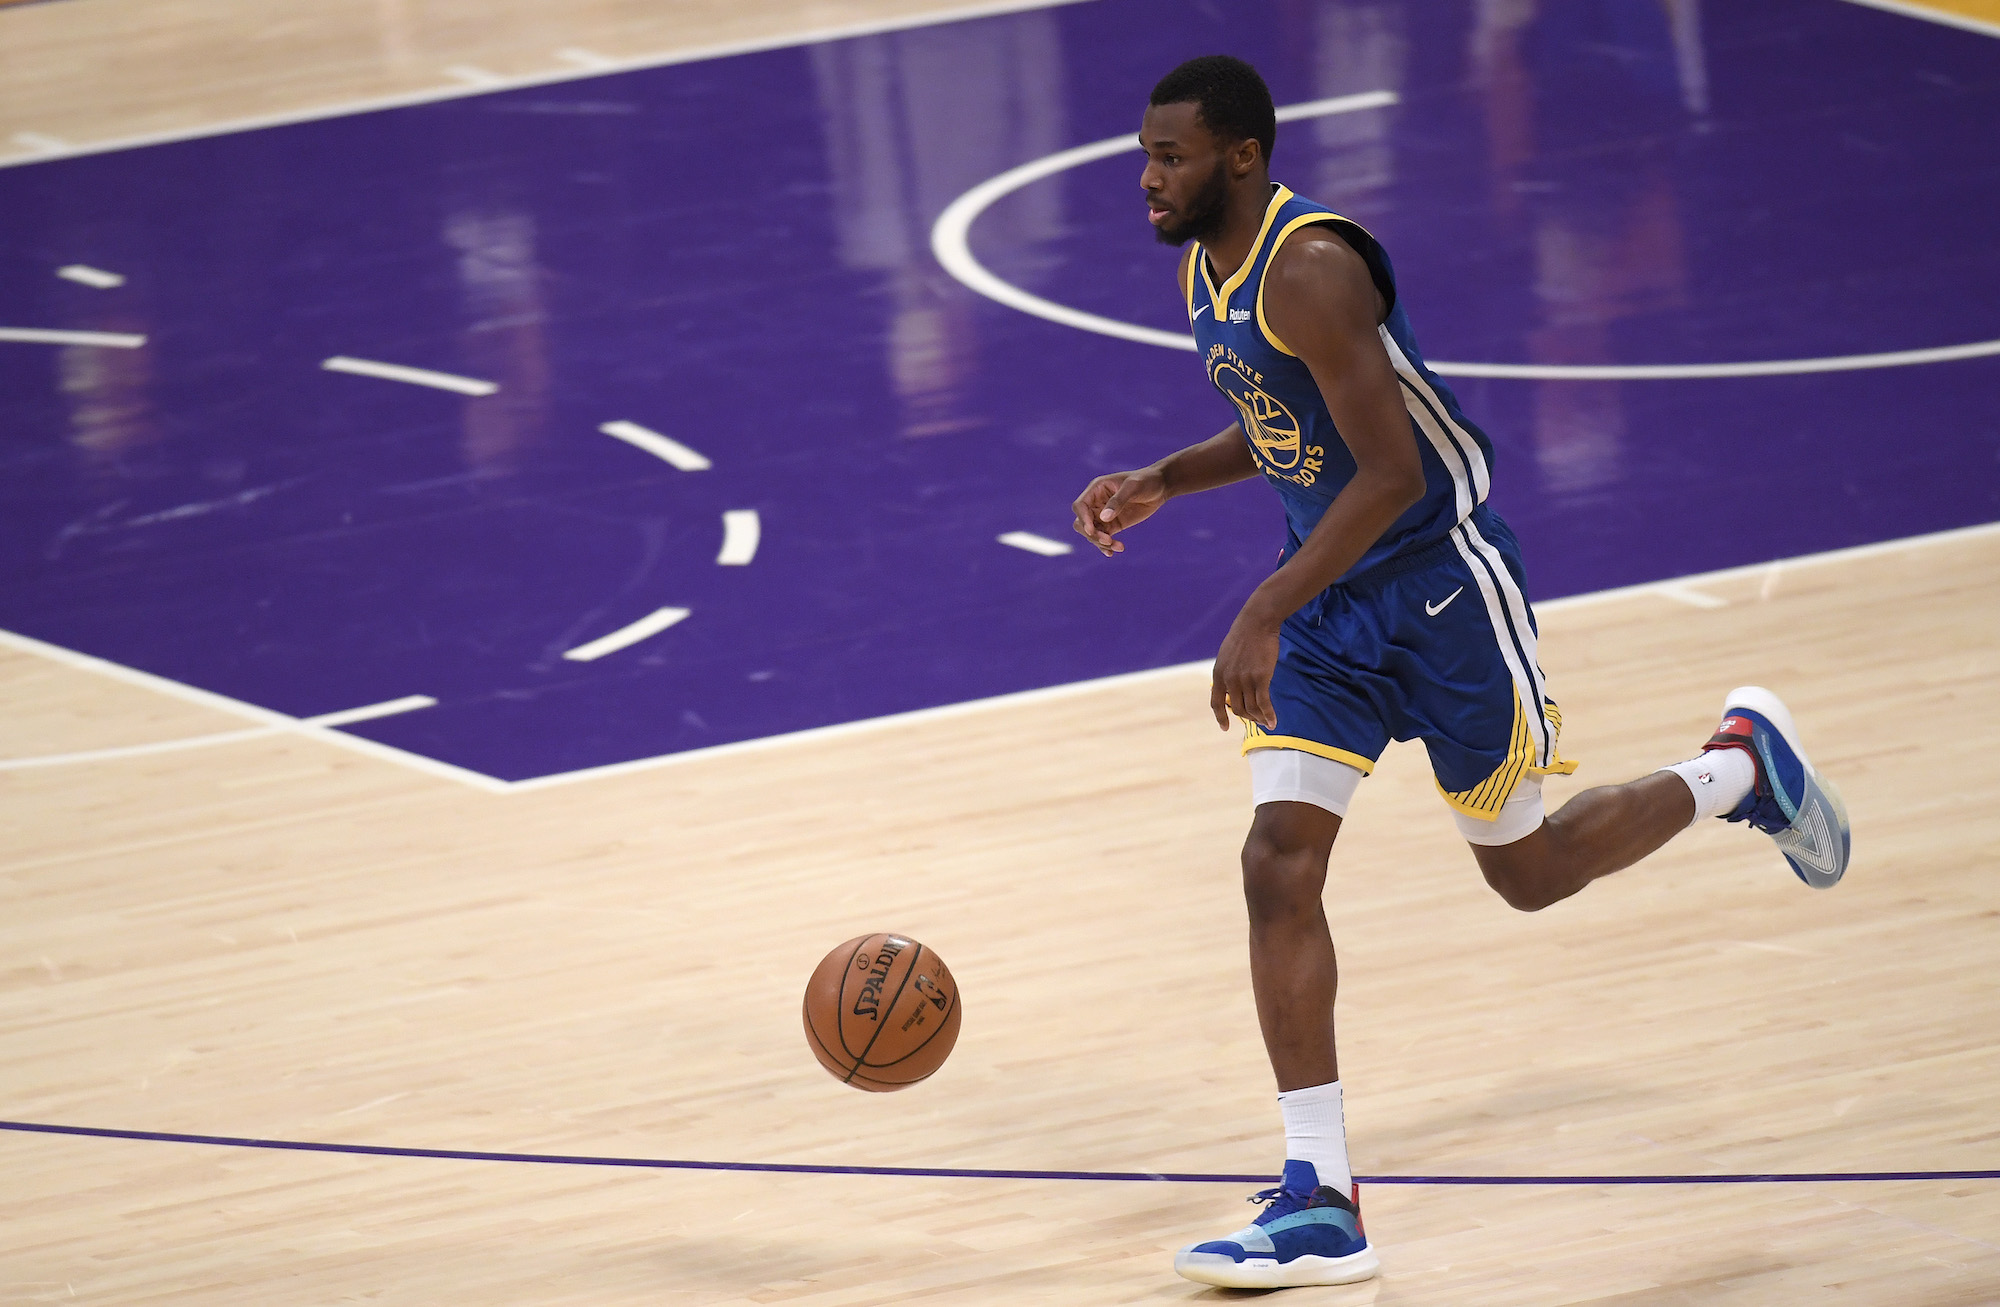 LOS ANGELES, CALIFORNIA - JANUARY 18: Andrew Wiggins #22 of the Golden State Warriors brings the ball up court during a 115-113 Warrior win over the Los Angeles Lakers on Martin Luther King Jr. Day at Staples Center on January 18, 2021 in Los Angeles, California. NOTE TO USER: User expressly acknowledges and agrees that, by downloading and/or using this Photograph, user is consenting to the terms and conditions of the Getty Images License Agreement. Mandatory Copyright Notice: Copyright 2021 NBAE (Photo by Harry How/Getty Images)